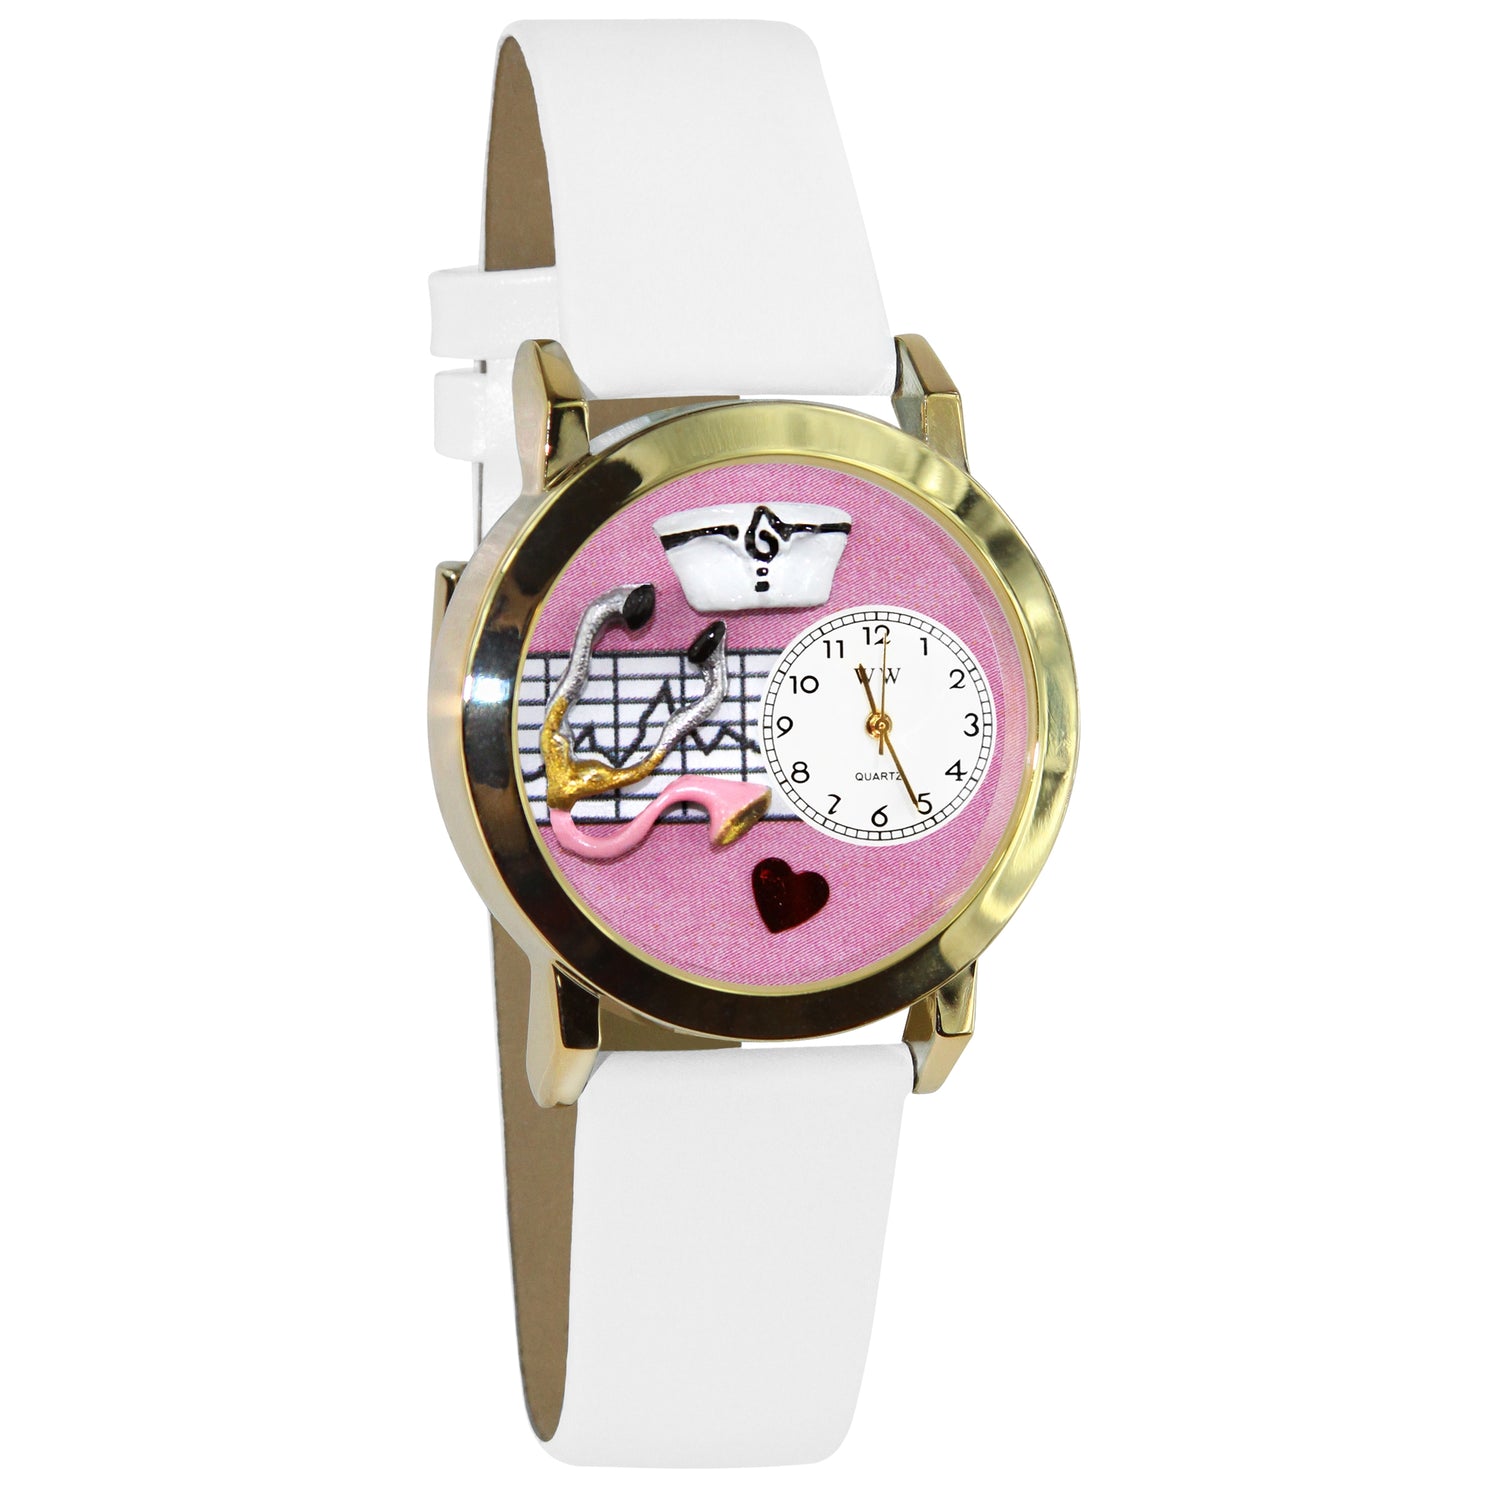 Whimsical Gifts | Nurse Pink 3D Watch Small Style | Handmade in USA | Professions Themed | Nurse | Novelty Unique Fun Miniatures Gift | Gold Finish White Leather Watch Band